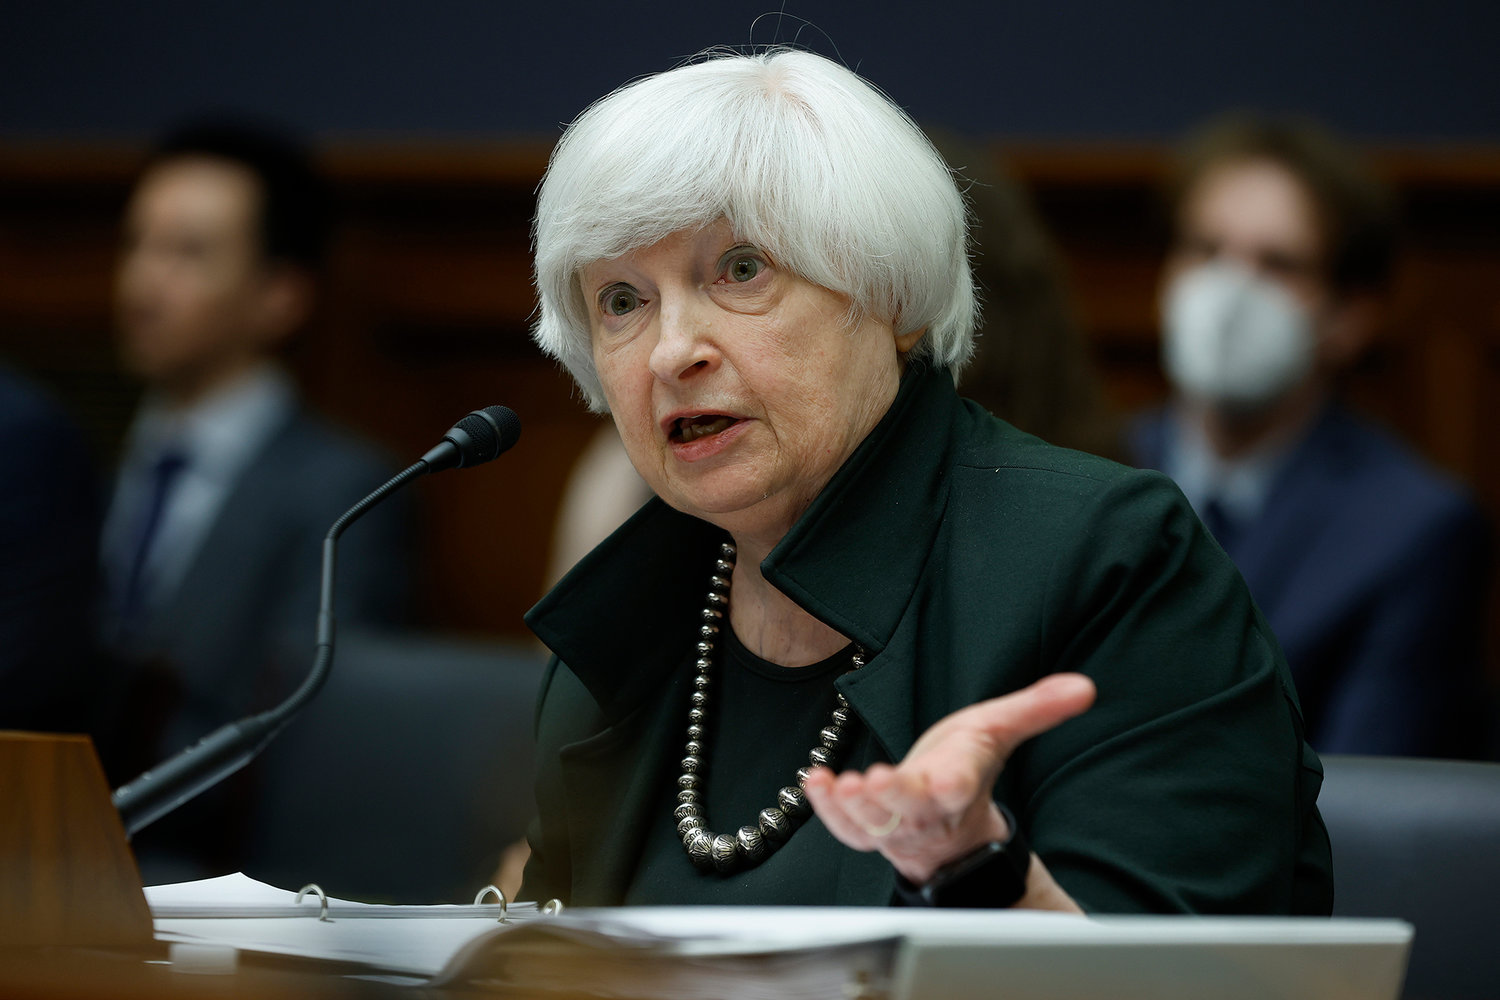 Treasury Secretary Janet Yellen testifies before the House Financial Services Committee in the Rayburn House Office Building on Capitol Hill on May 12, 2022, in Washington, D.C. (Chip Somodevilla/Getty Images/TNS)